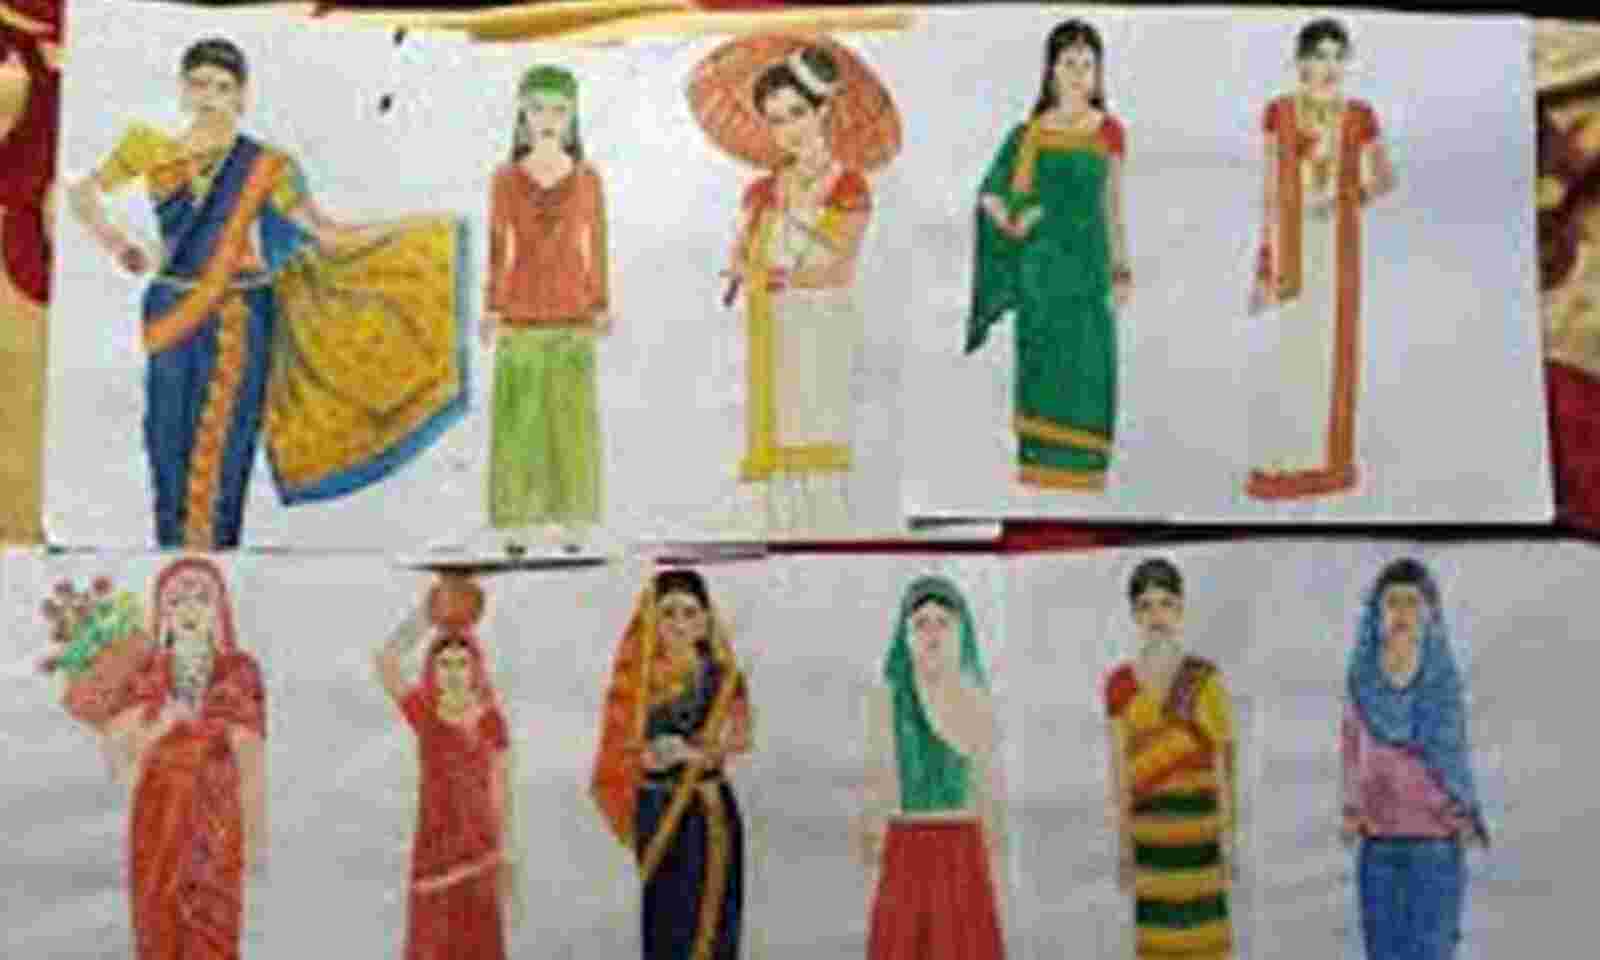 PPT on traditional dress of Andhra Pradesh|#ppt|traditional dress 👗|❤️ -  YouTube